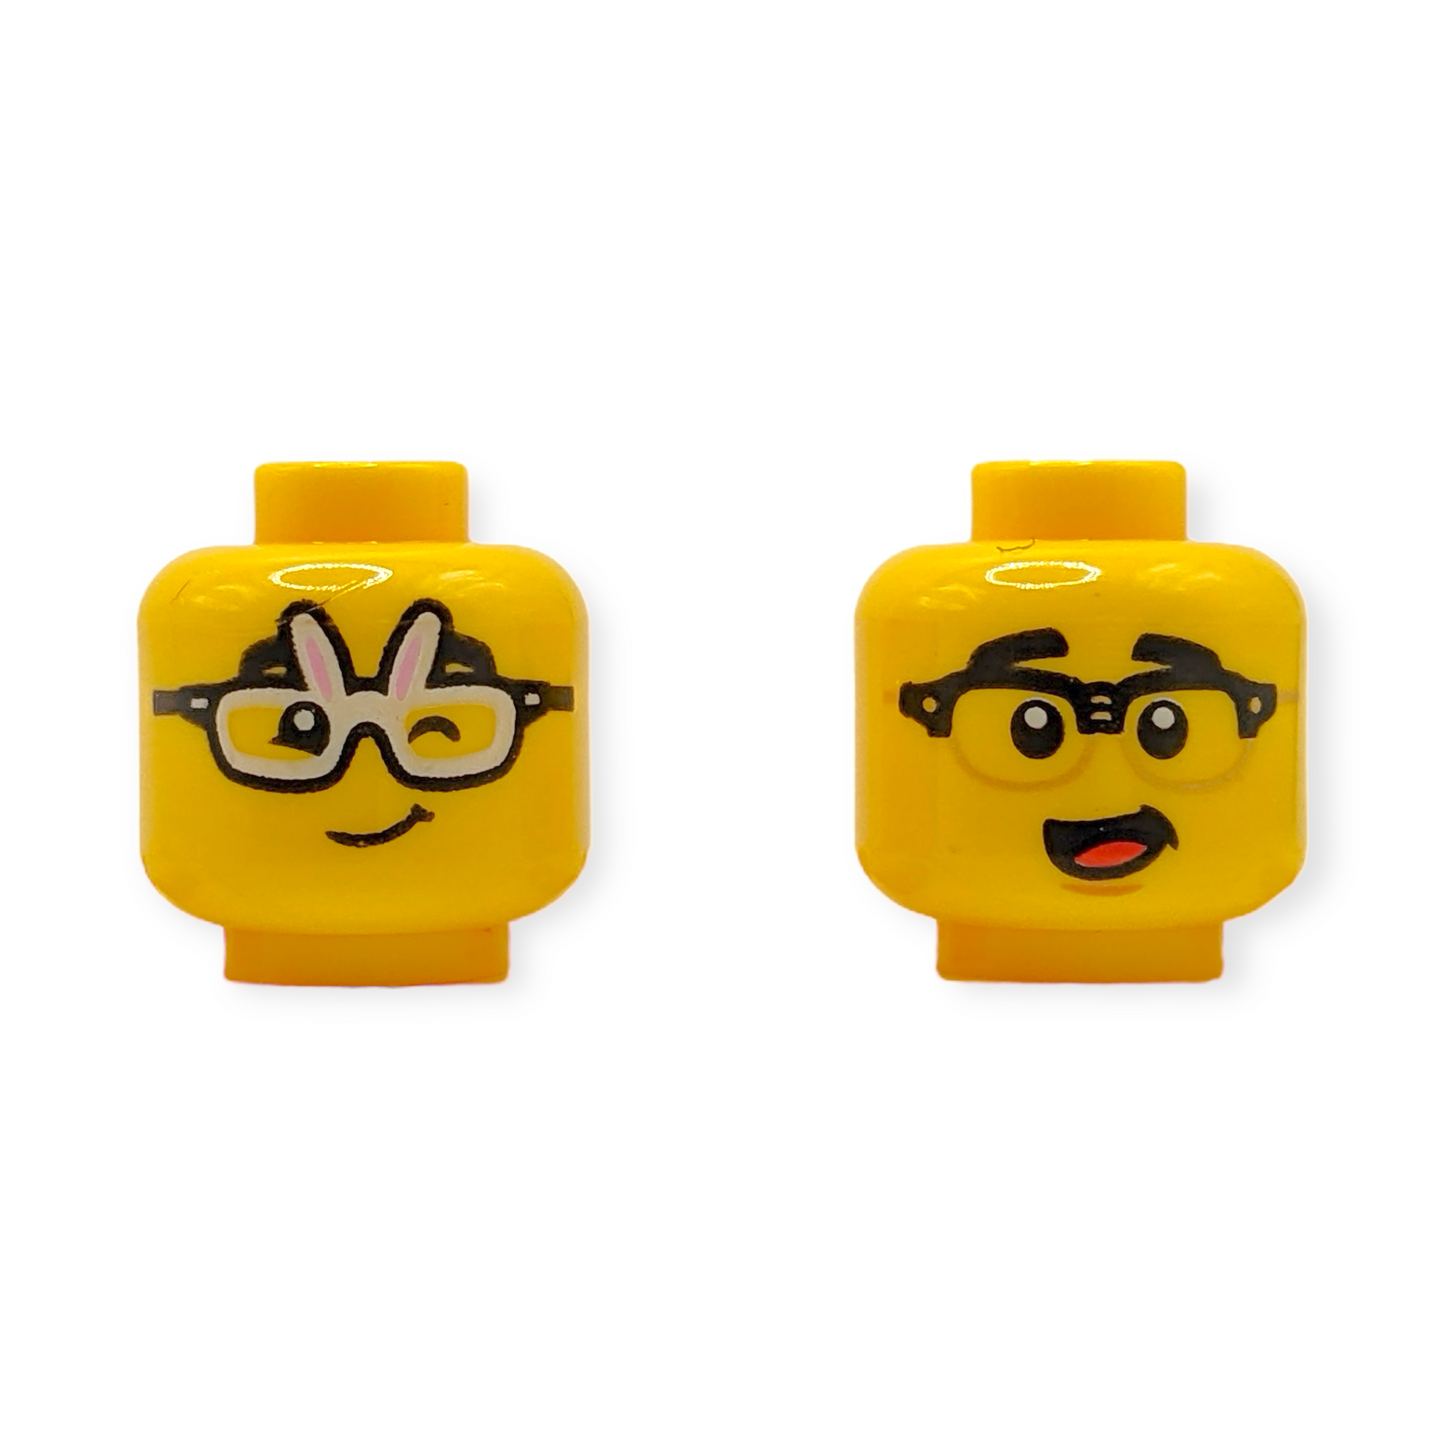 LEGO Head - 3912 Dual Sided Black Eyebrows, Black and Gold Glasses